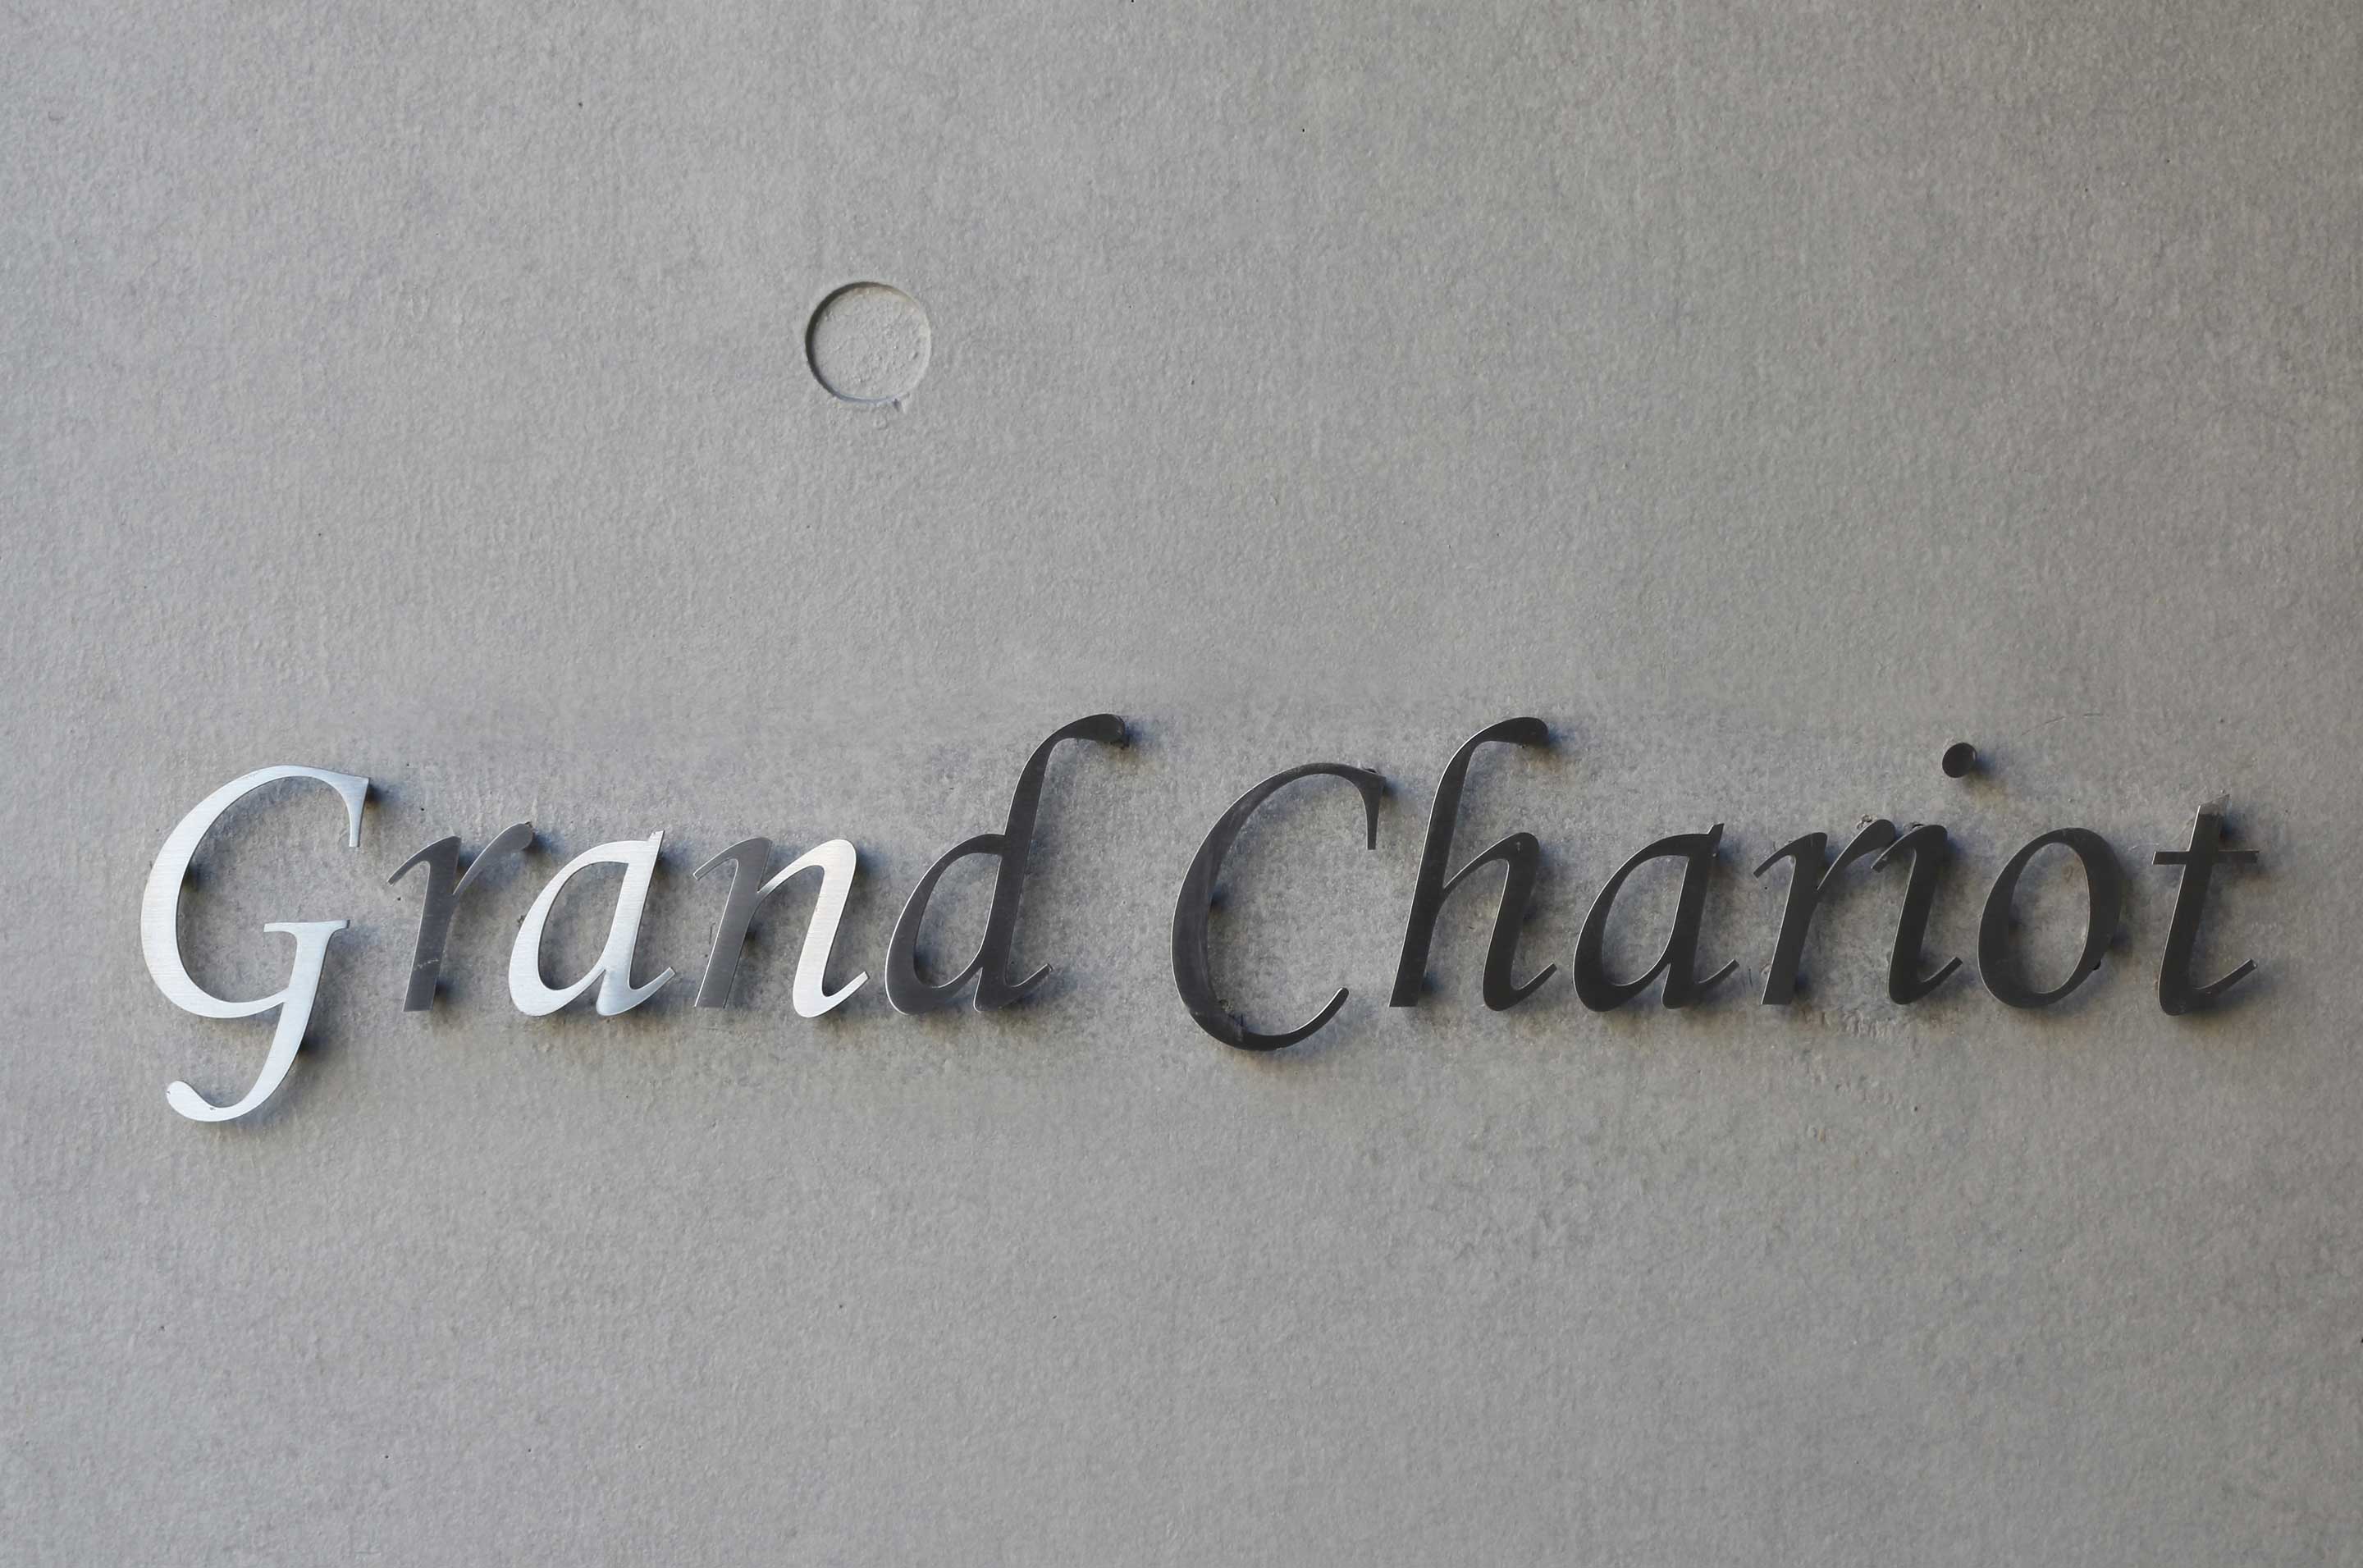 Grand  Chariot